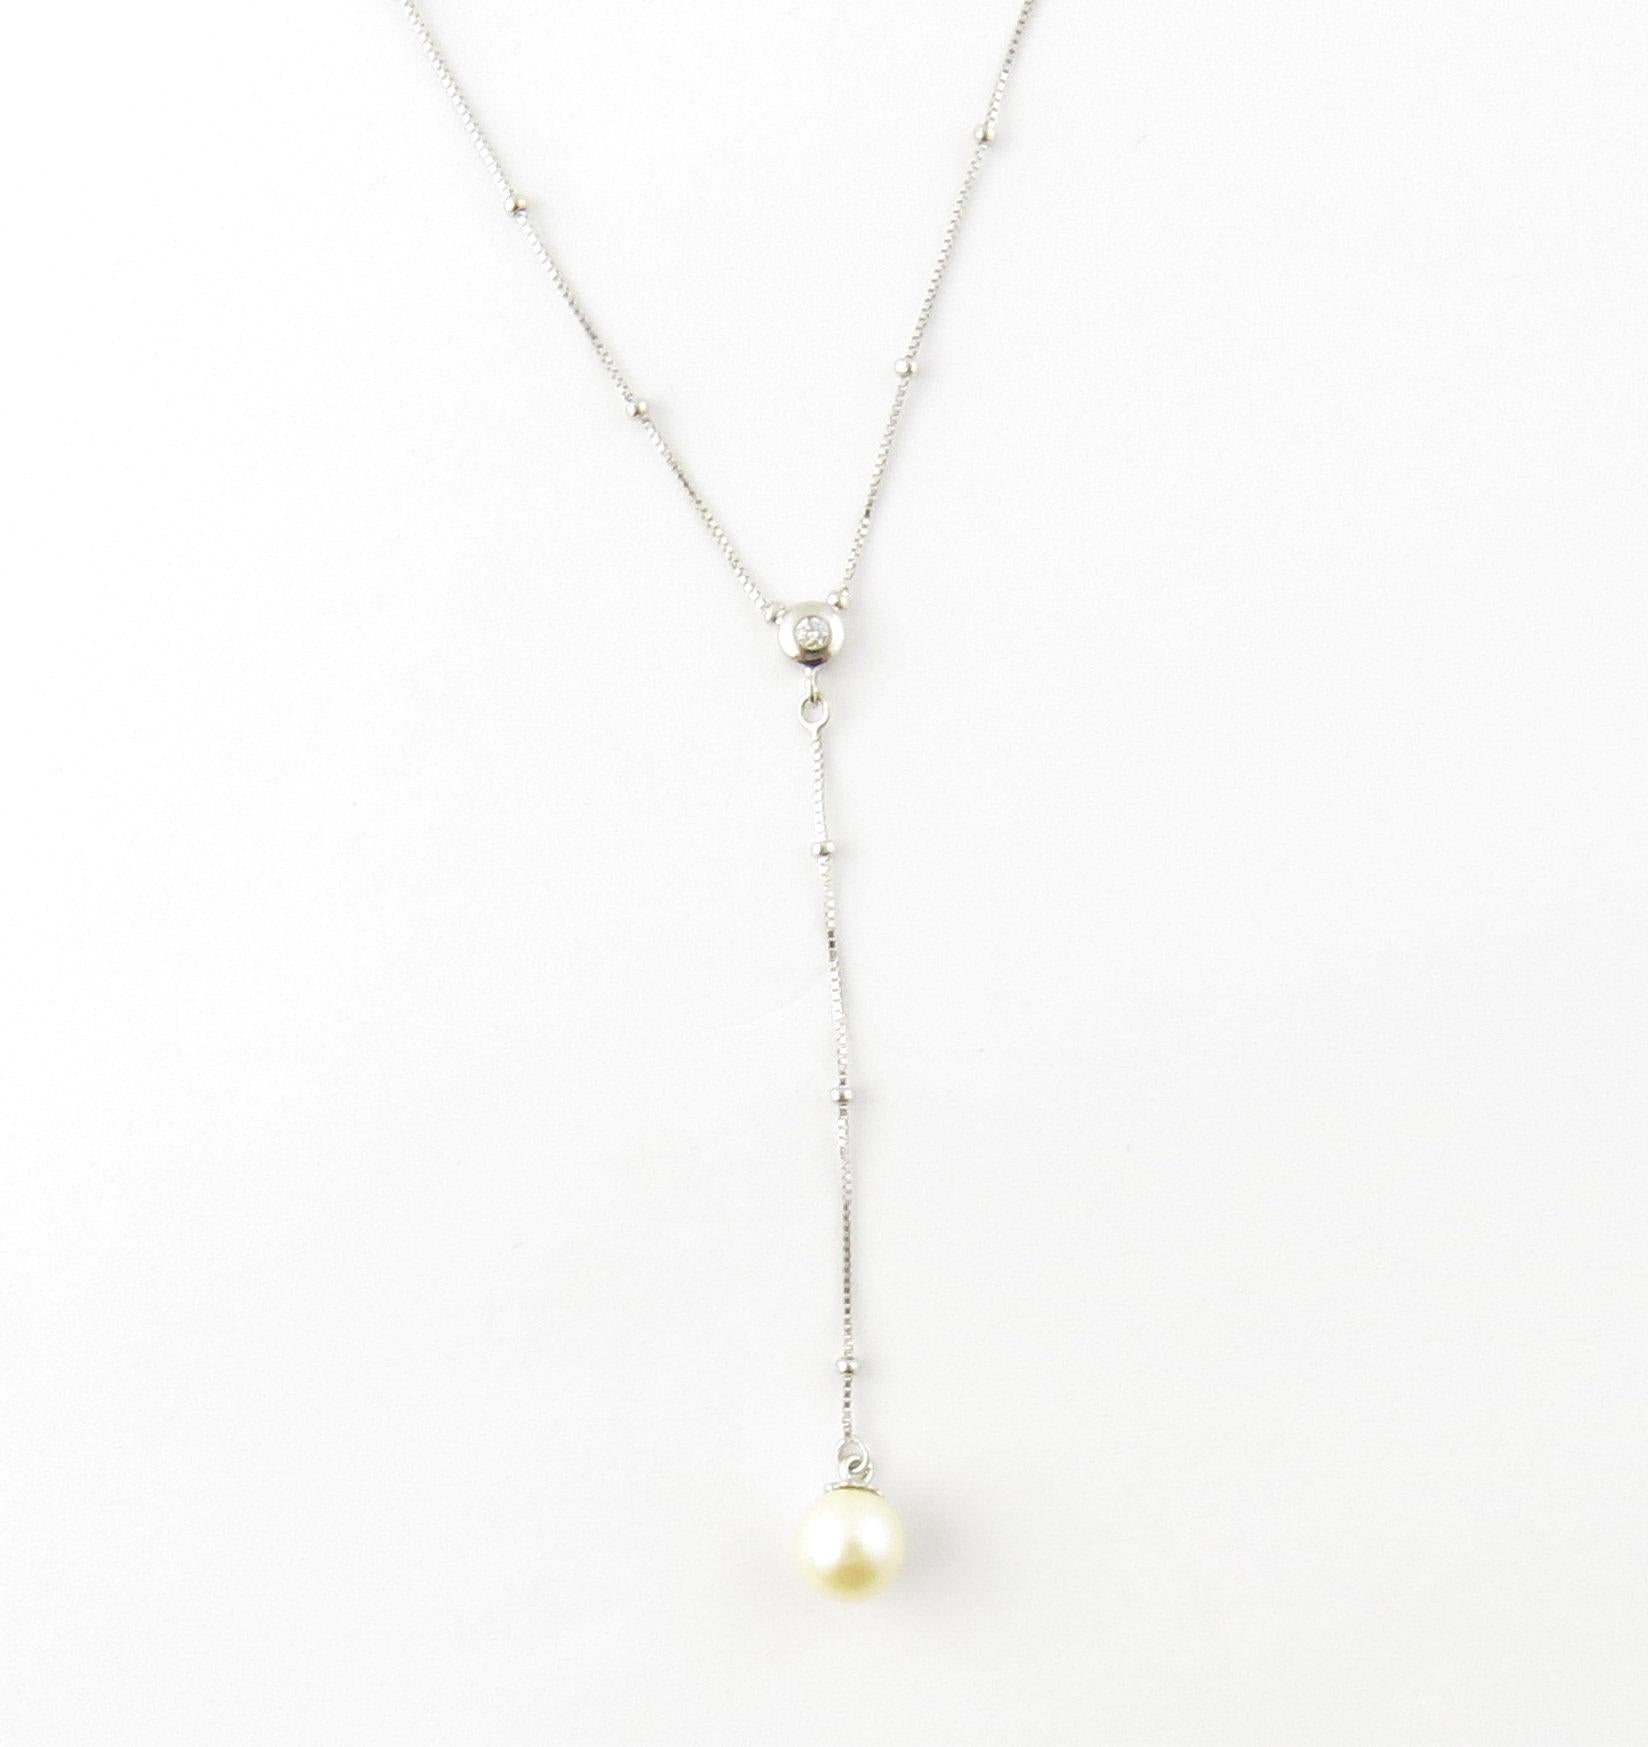 Vintage 14 Karat White Gold Diamond and Pearl Drop Necklace- 
This exquisite necklace is decorated with one round brilliant cut diamond and a luminous 7 mm cultured pearl drop on a stunning beaded necklace. 
Approximate total diamond weight: .03 ct.